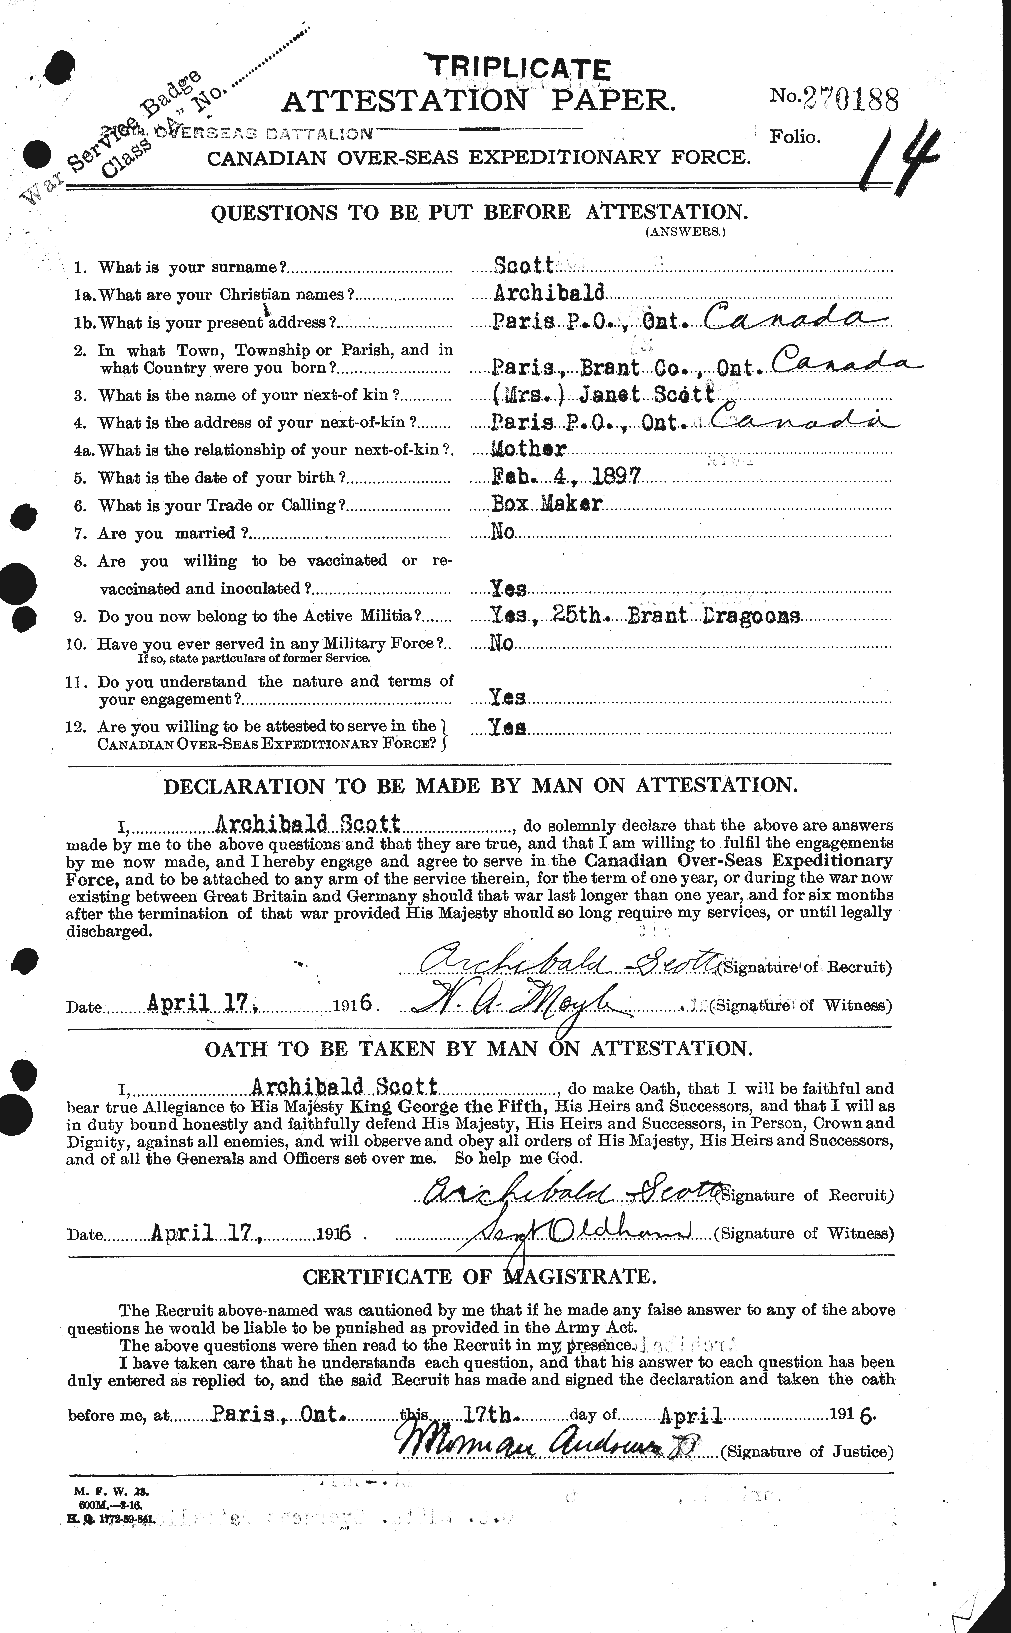 Personnel Records of the First World War - CEF 086430a